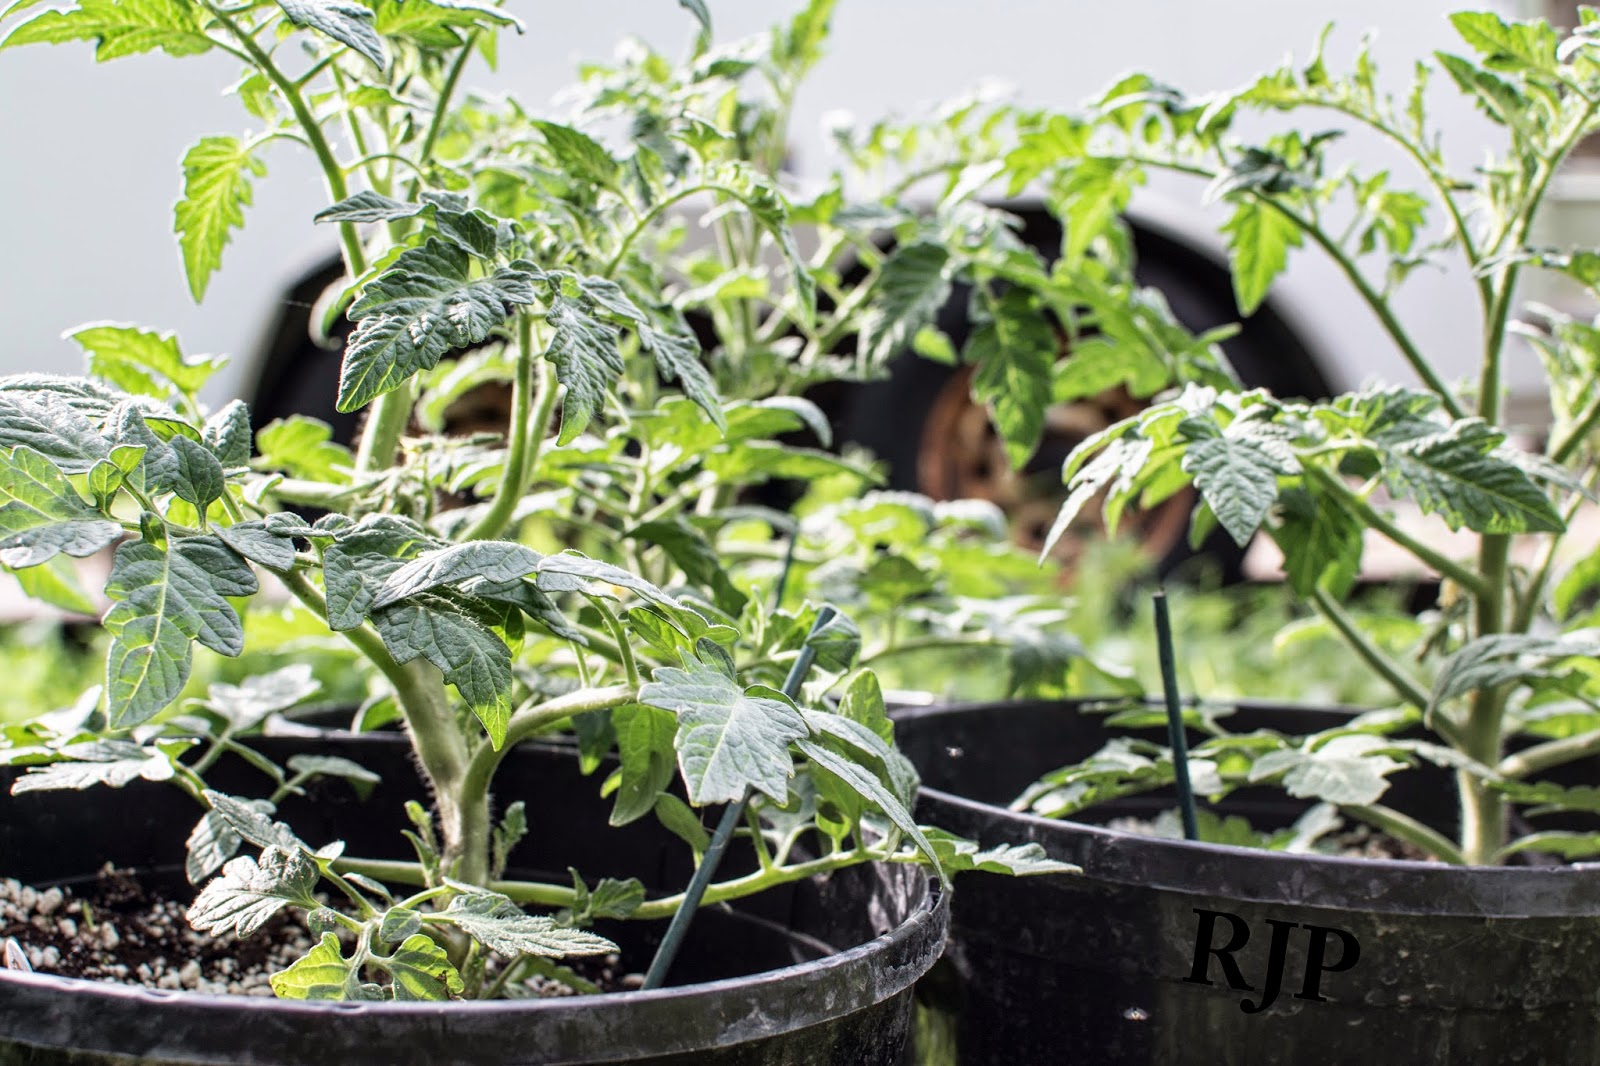 Patio Tomatoes: These tomatoes can grow in the pot all season. Photo: Reed Petersen